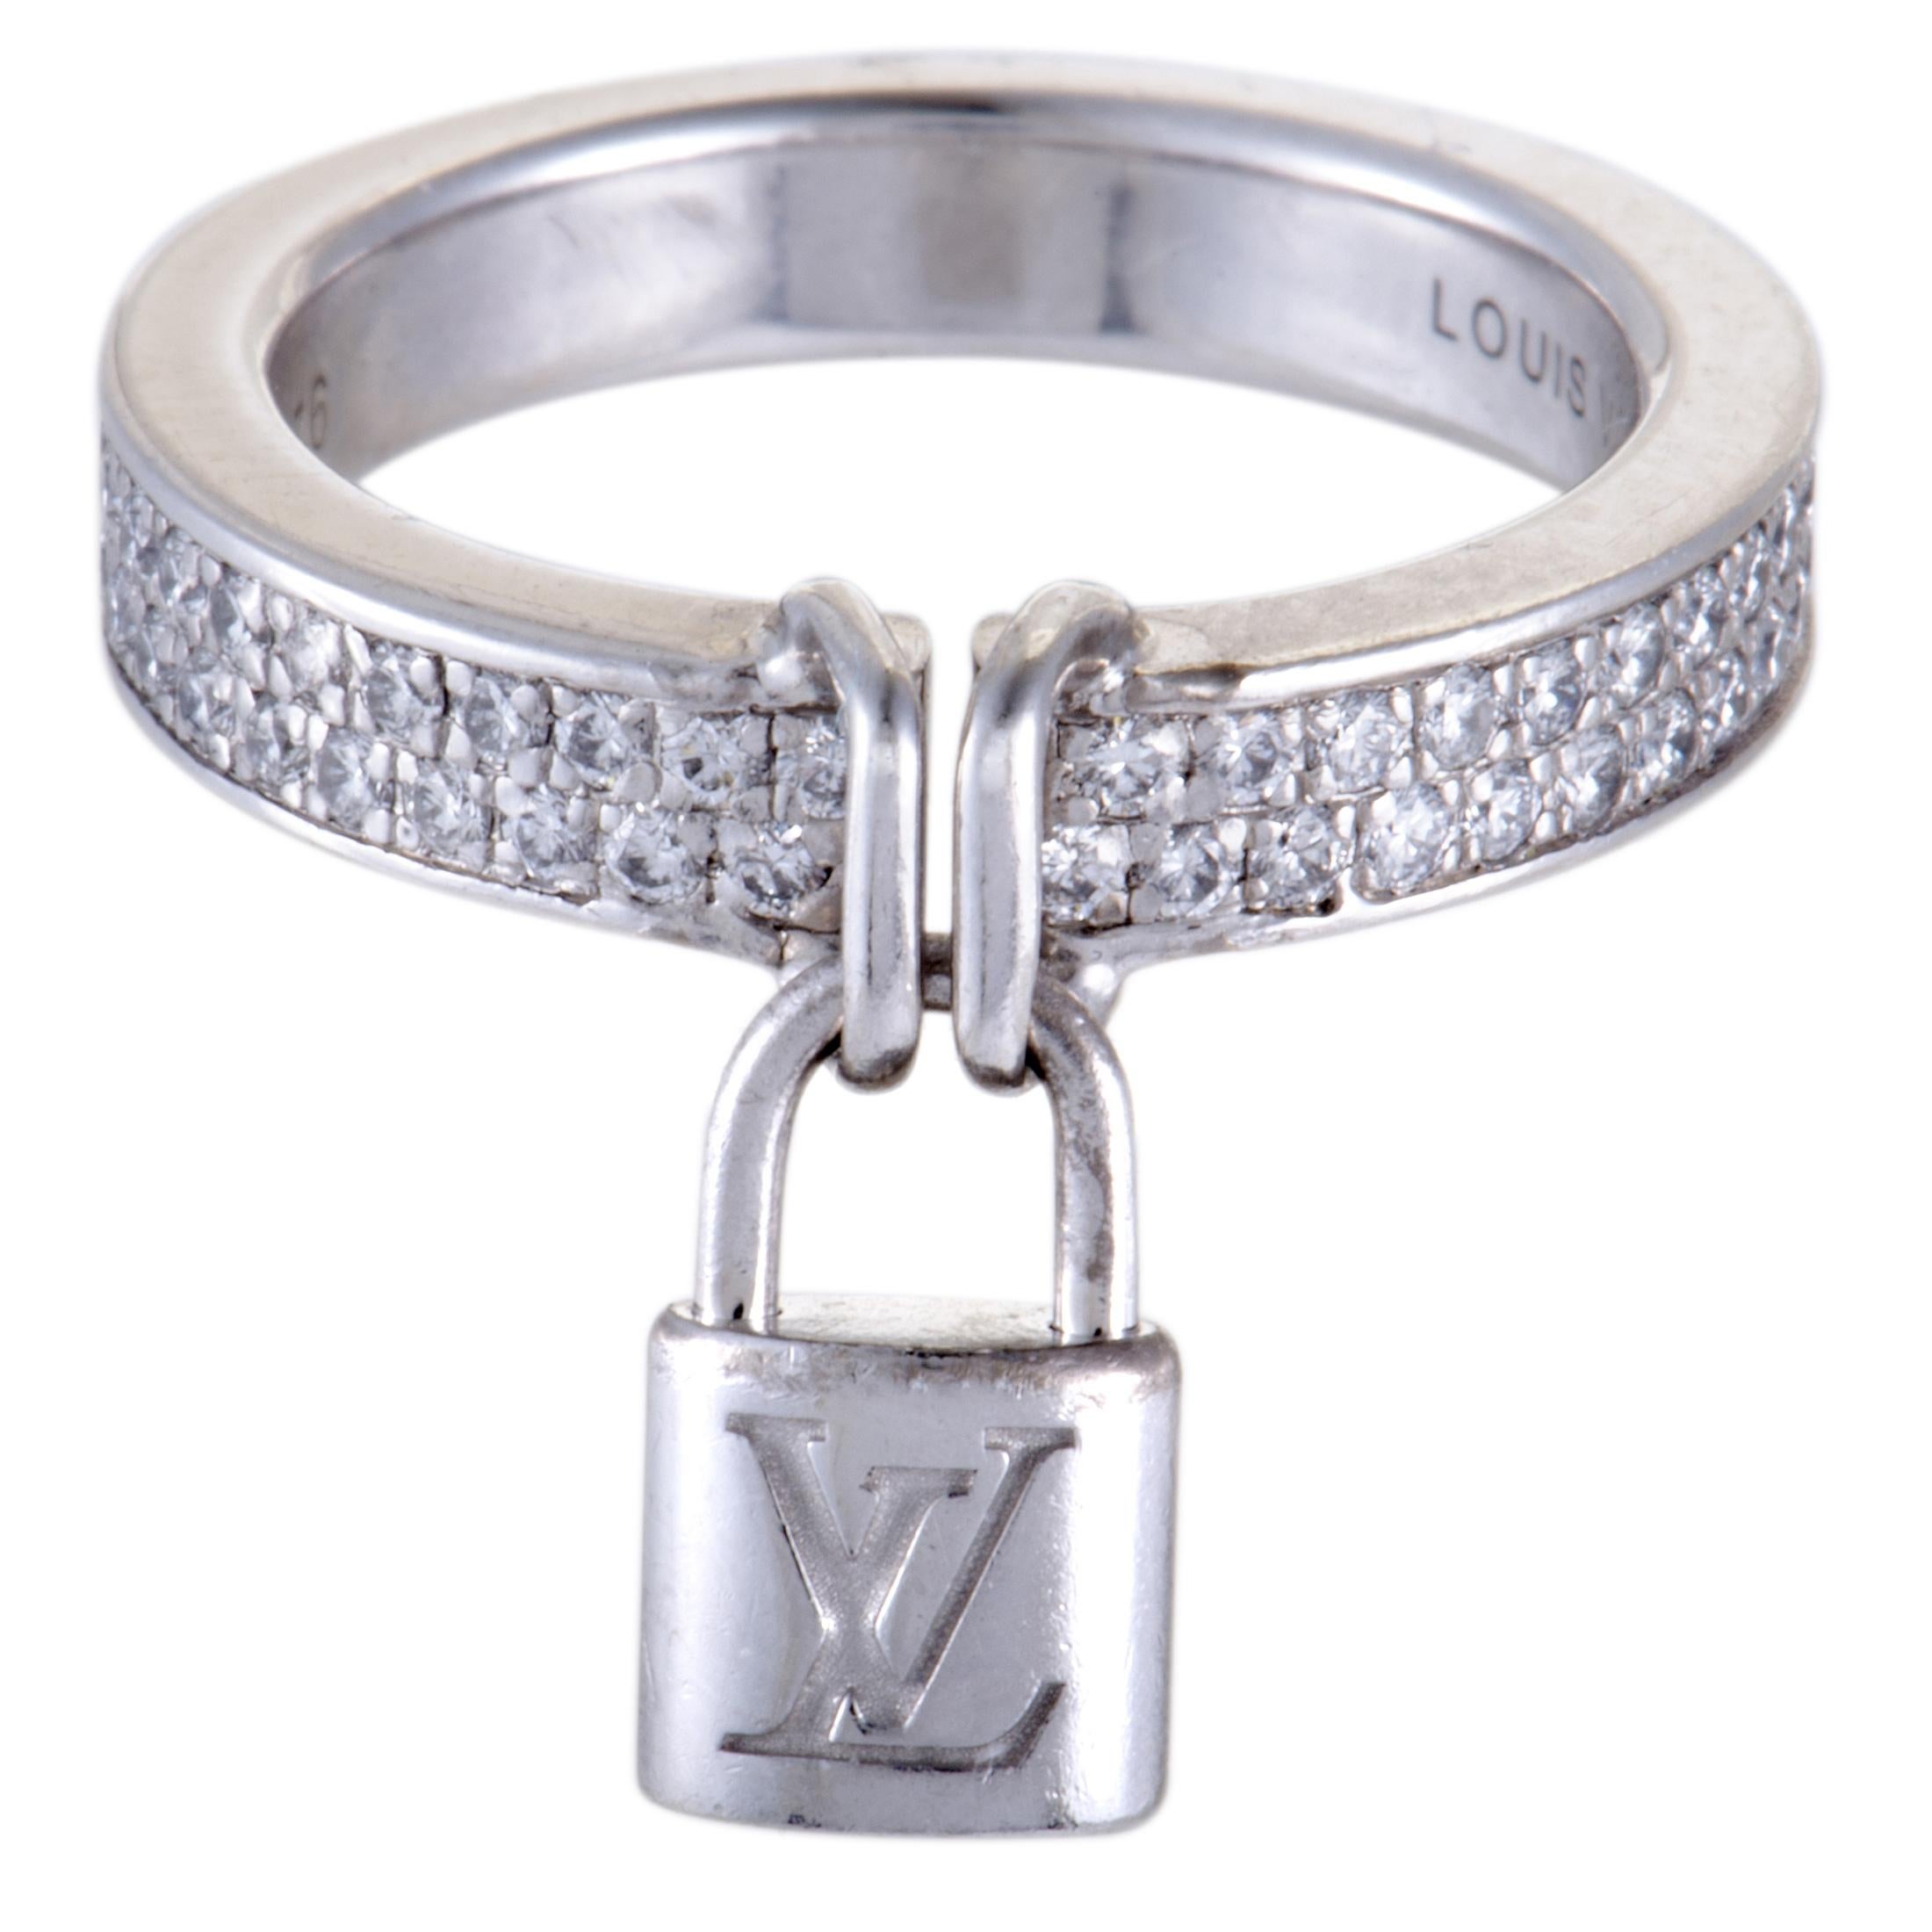 This glamorous 18K white gold by Louis Vuitton gold exhibits a sensationally alluring style. The gorgeous ring features 0.40ct of dazzling diamonds and a lock with classic LV symbol that accentuates the luxurious appeal of the exquisite piece.
Ring